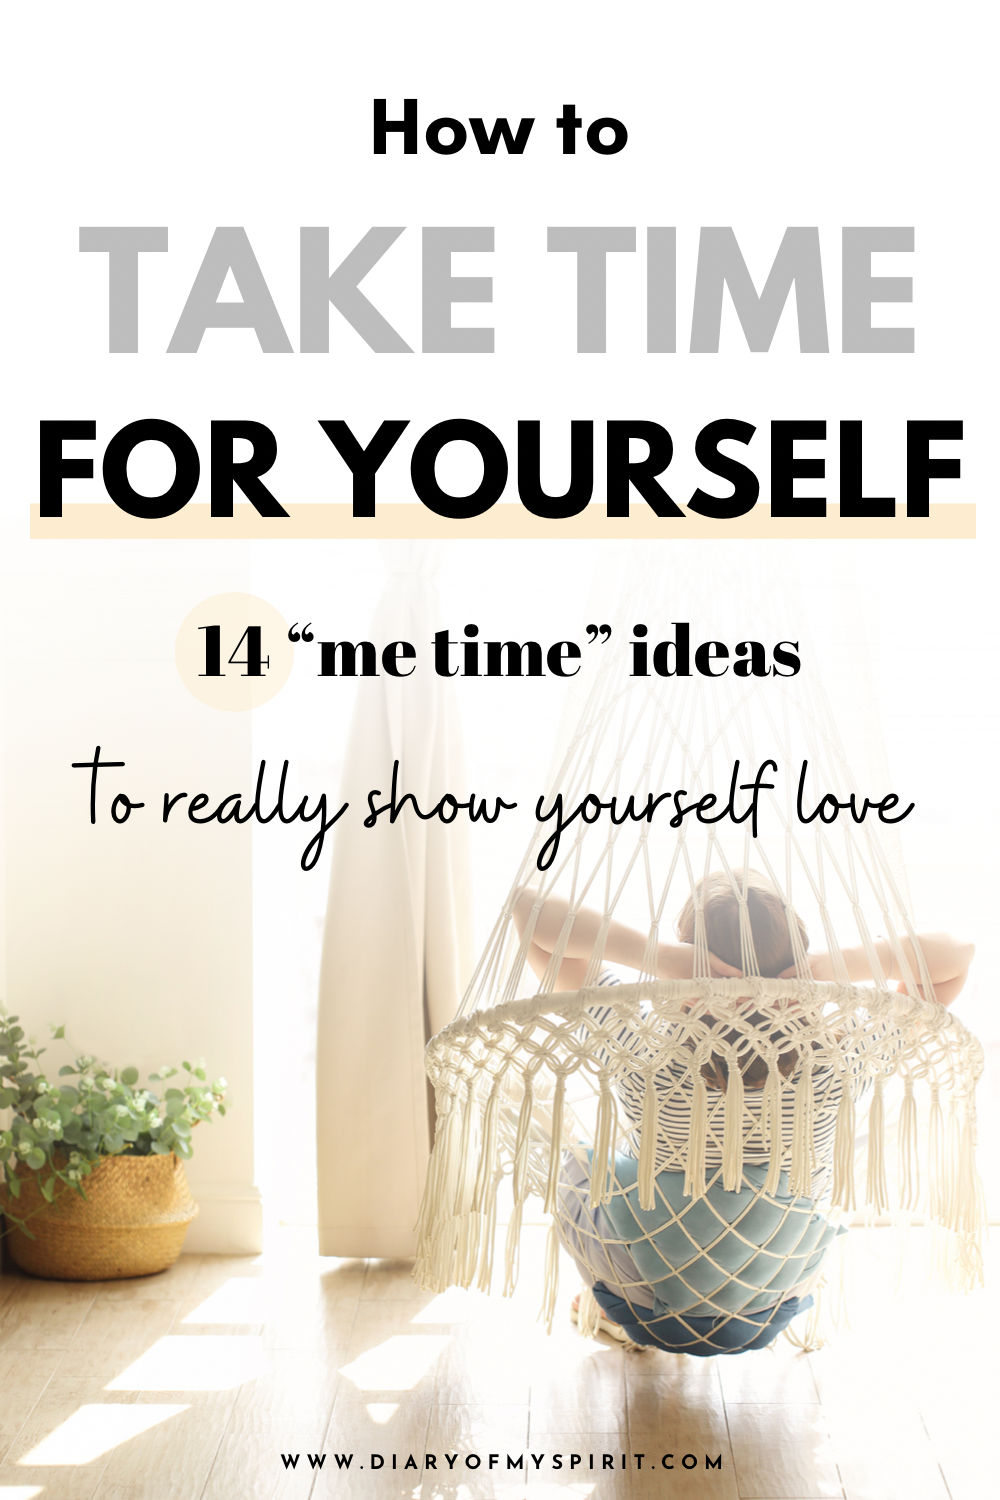 how to take time for yourself. self care ideas for mind body and soul. self-care ideas for mental health. me time ideas